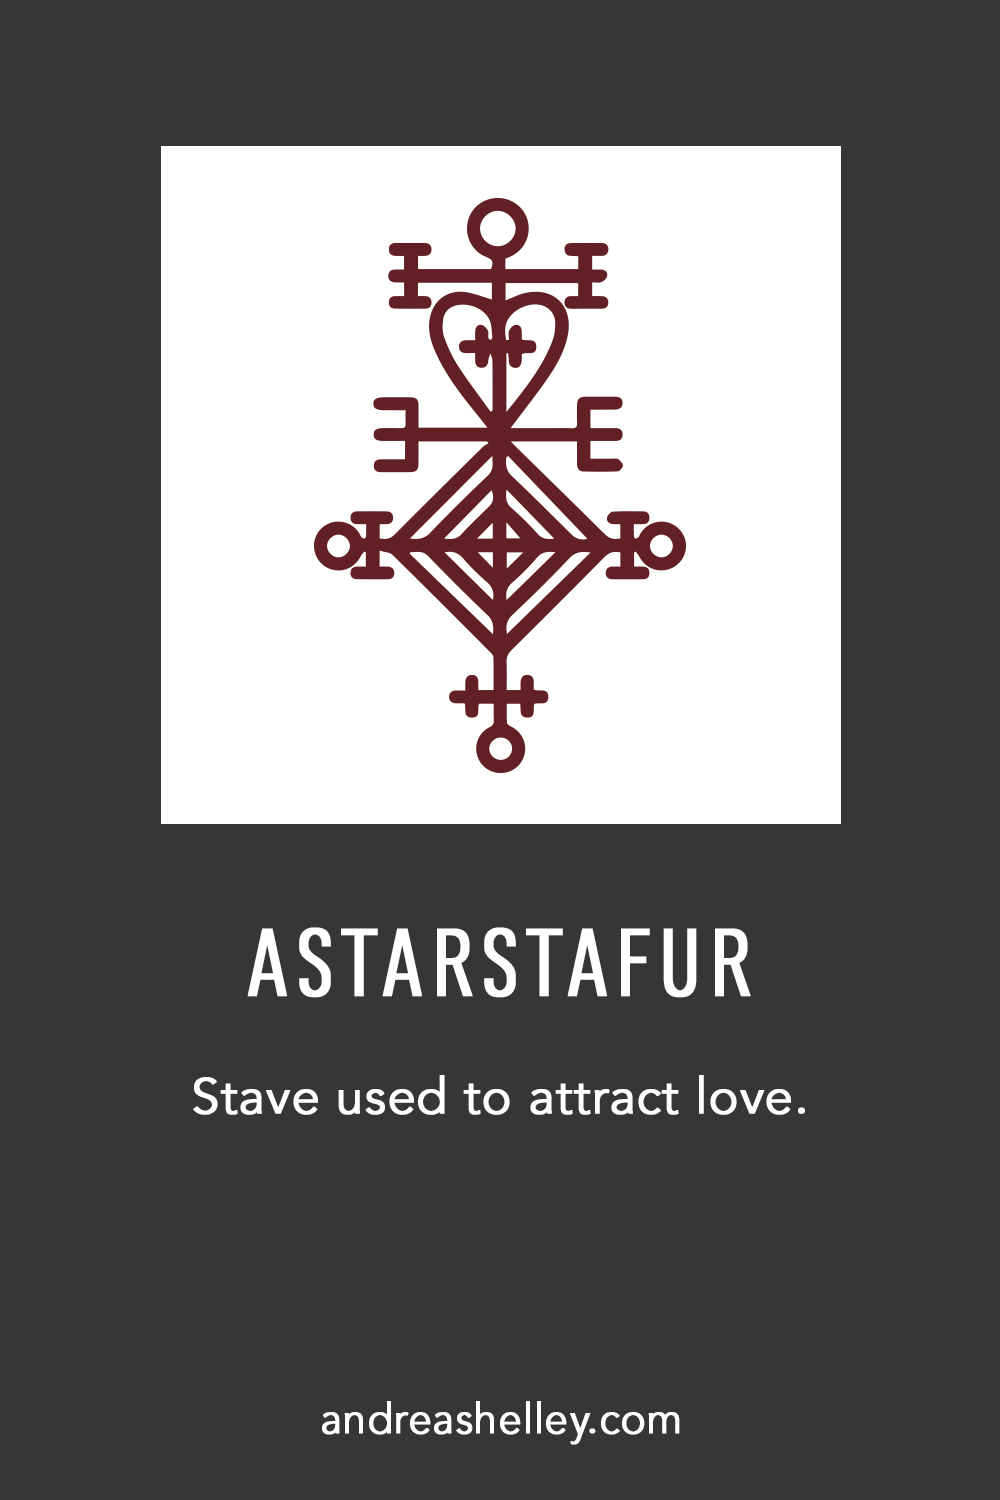 Astarstafur is a stave used to attract love.